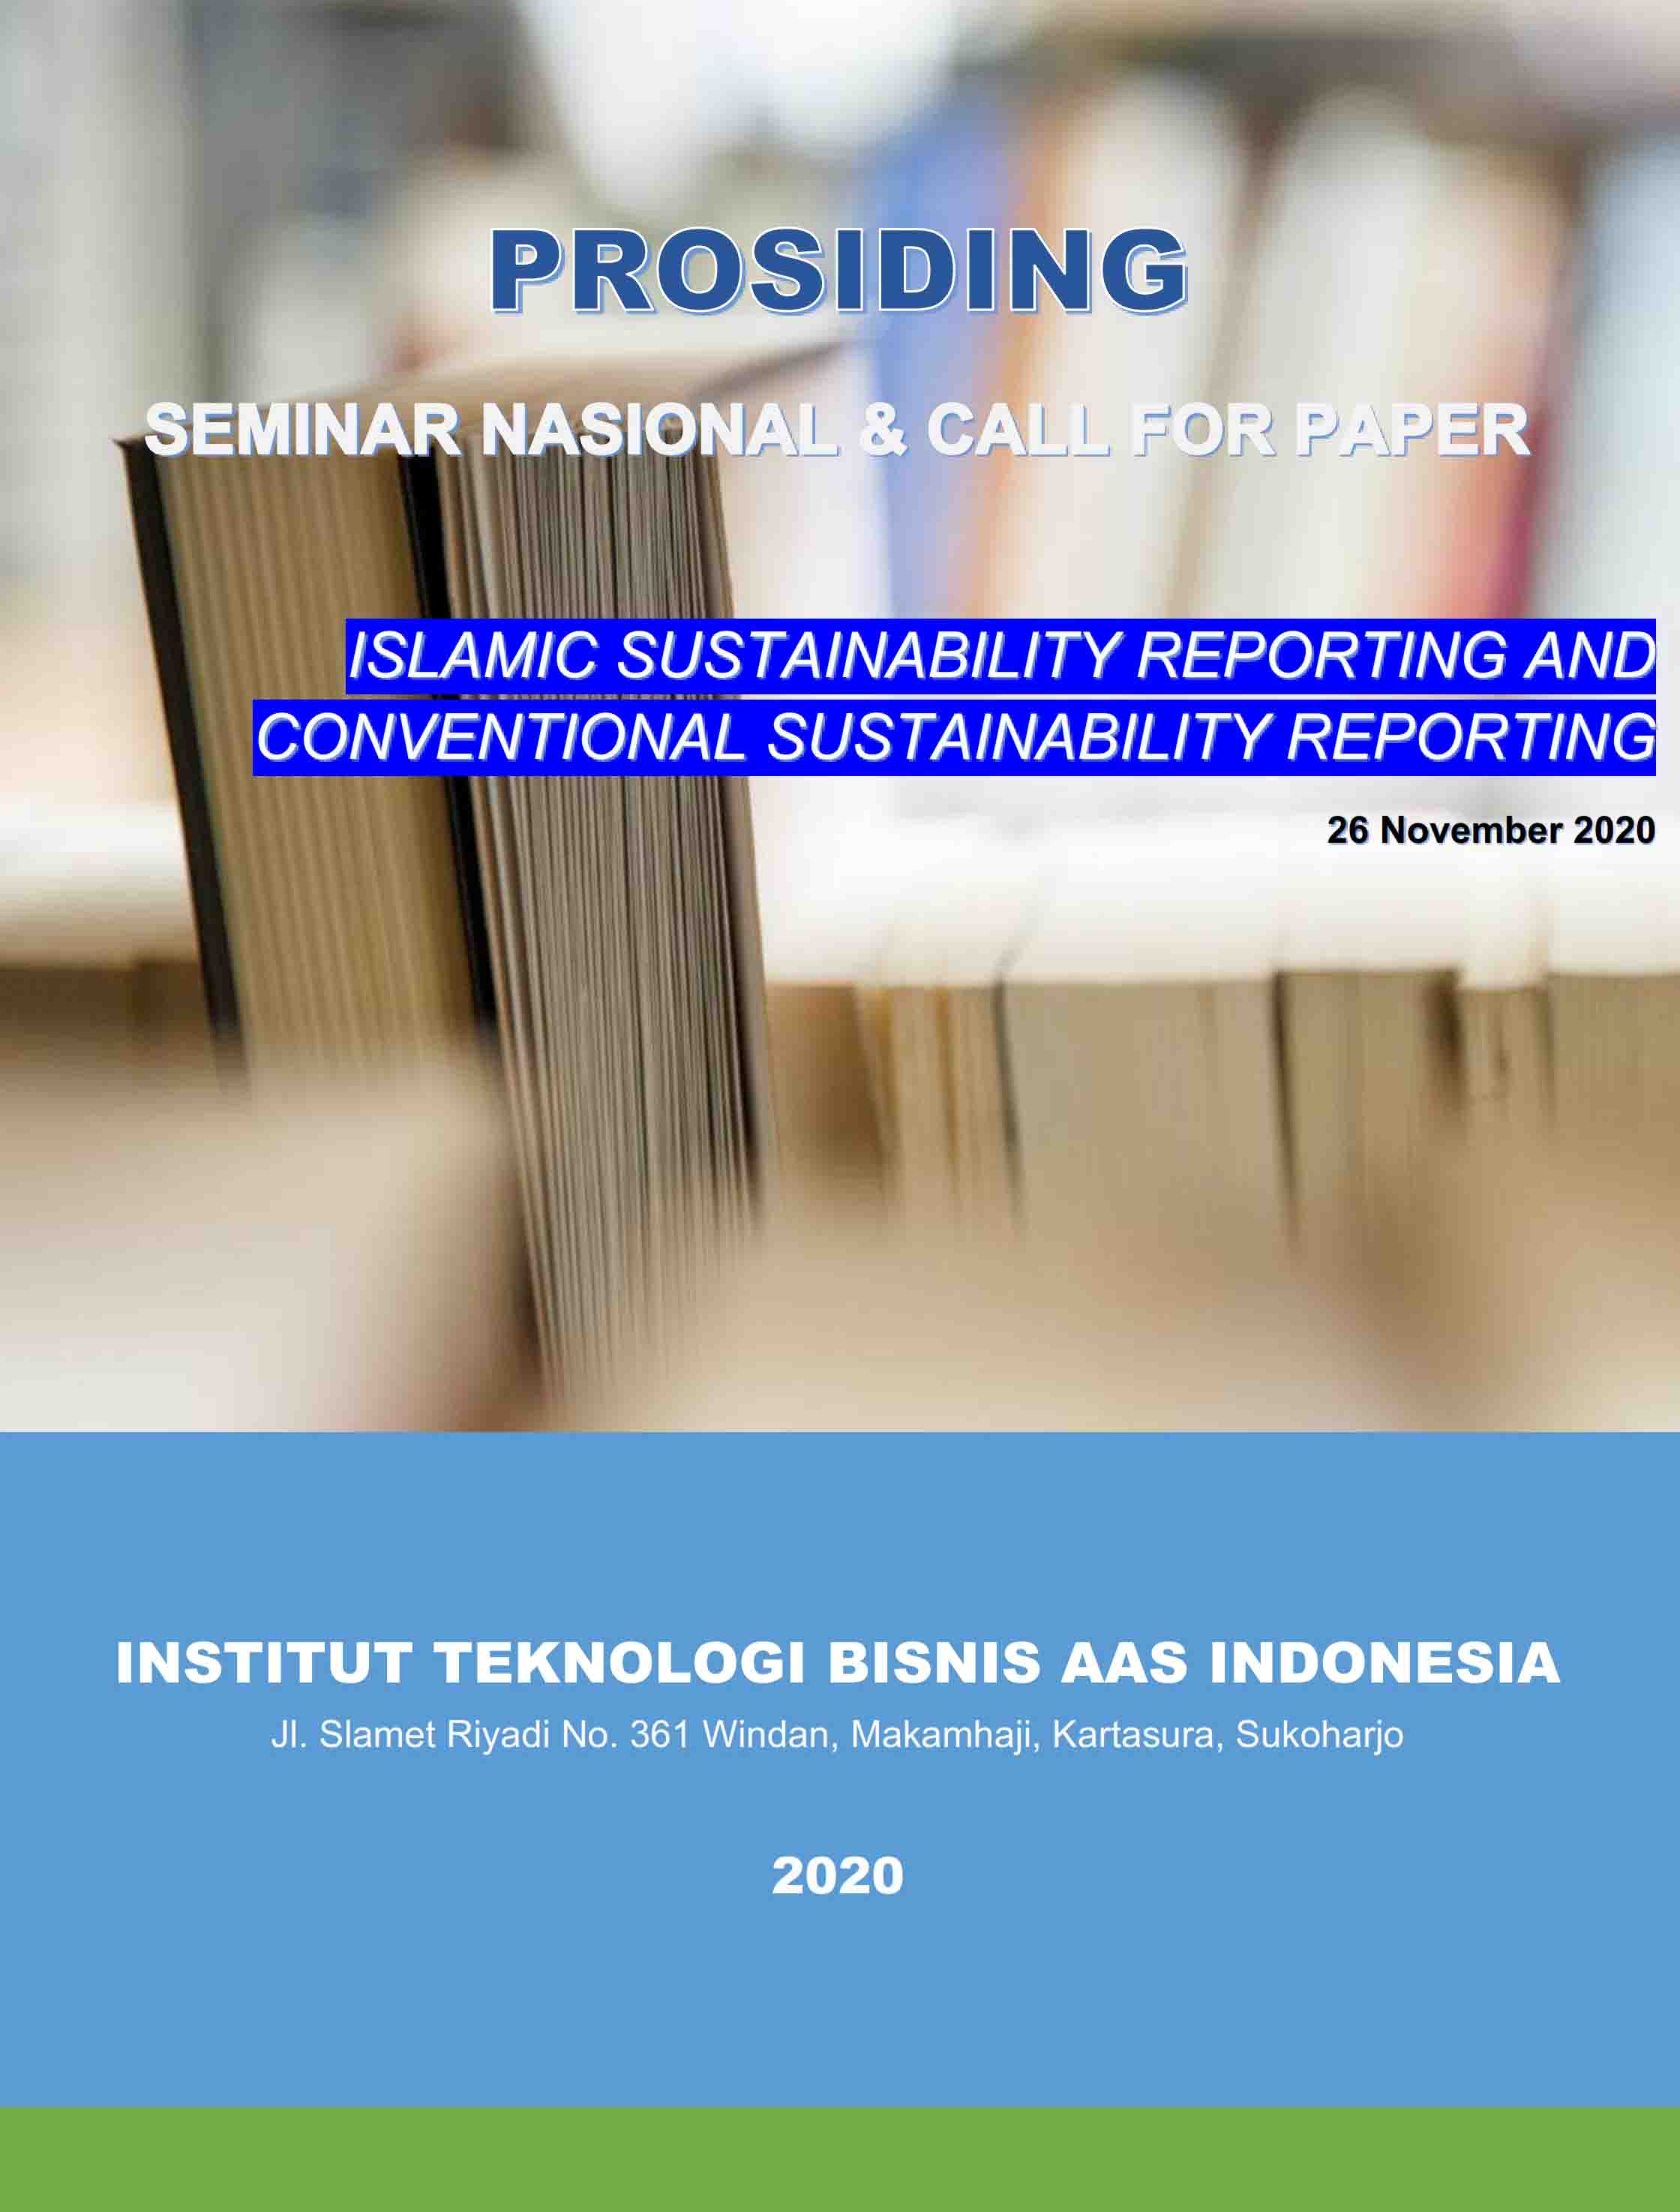 Indonesia itb aas An Analysis